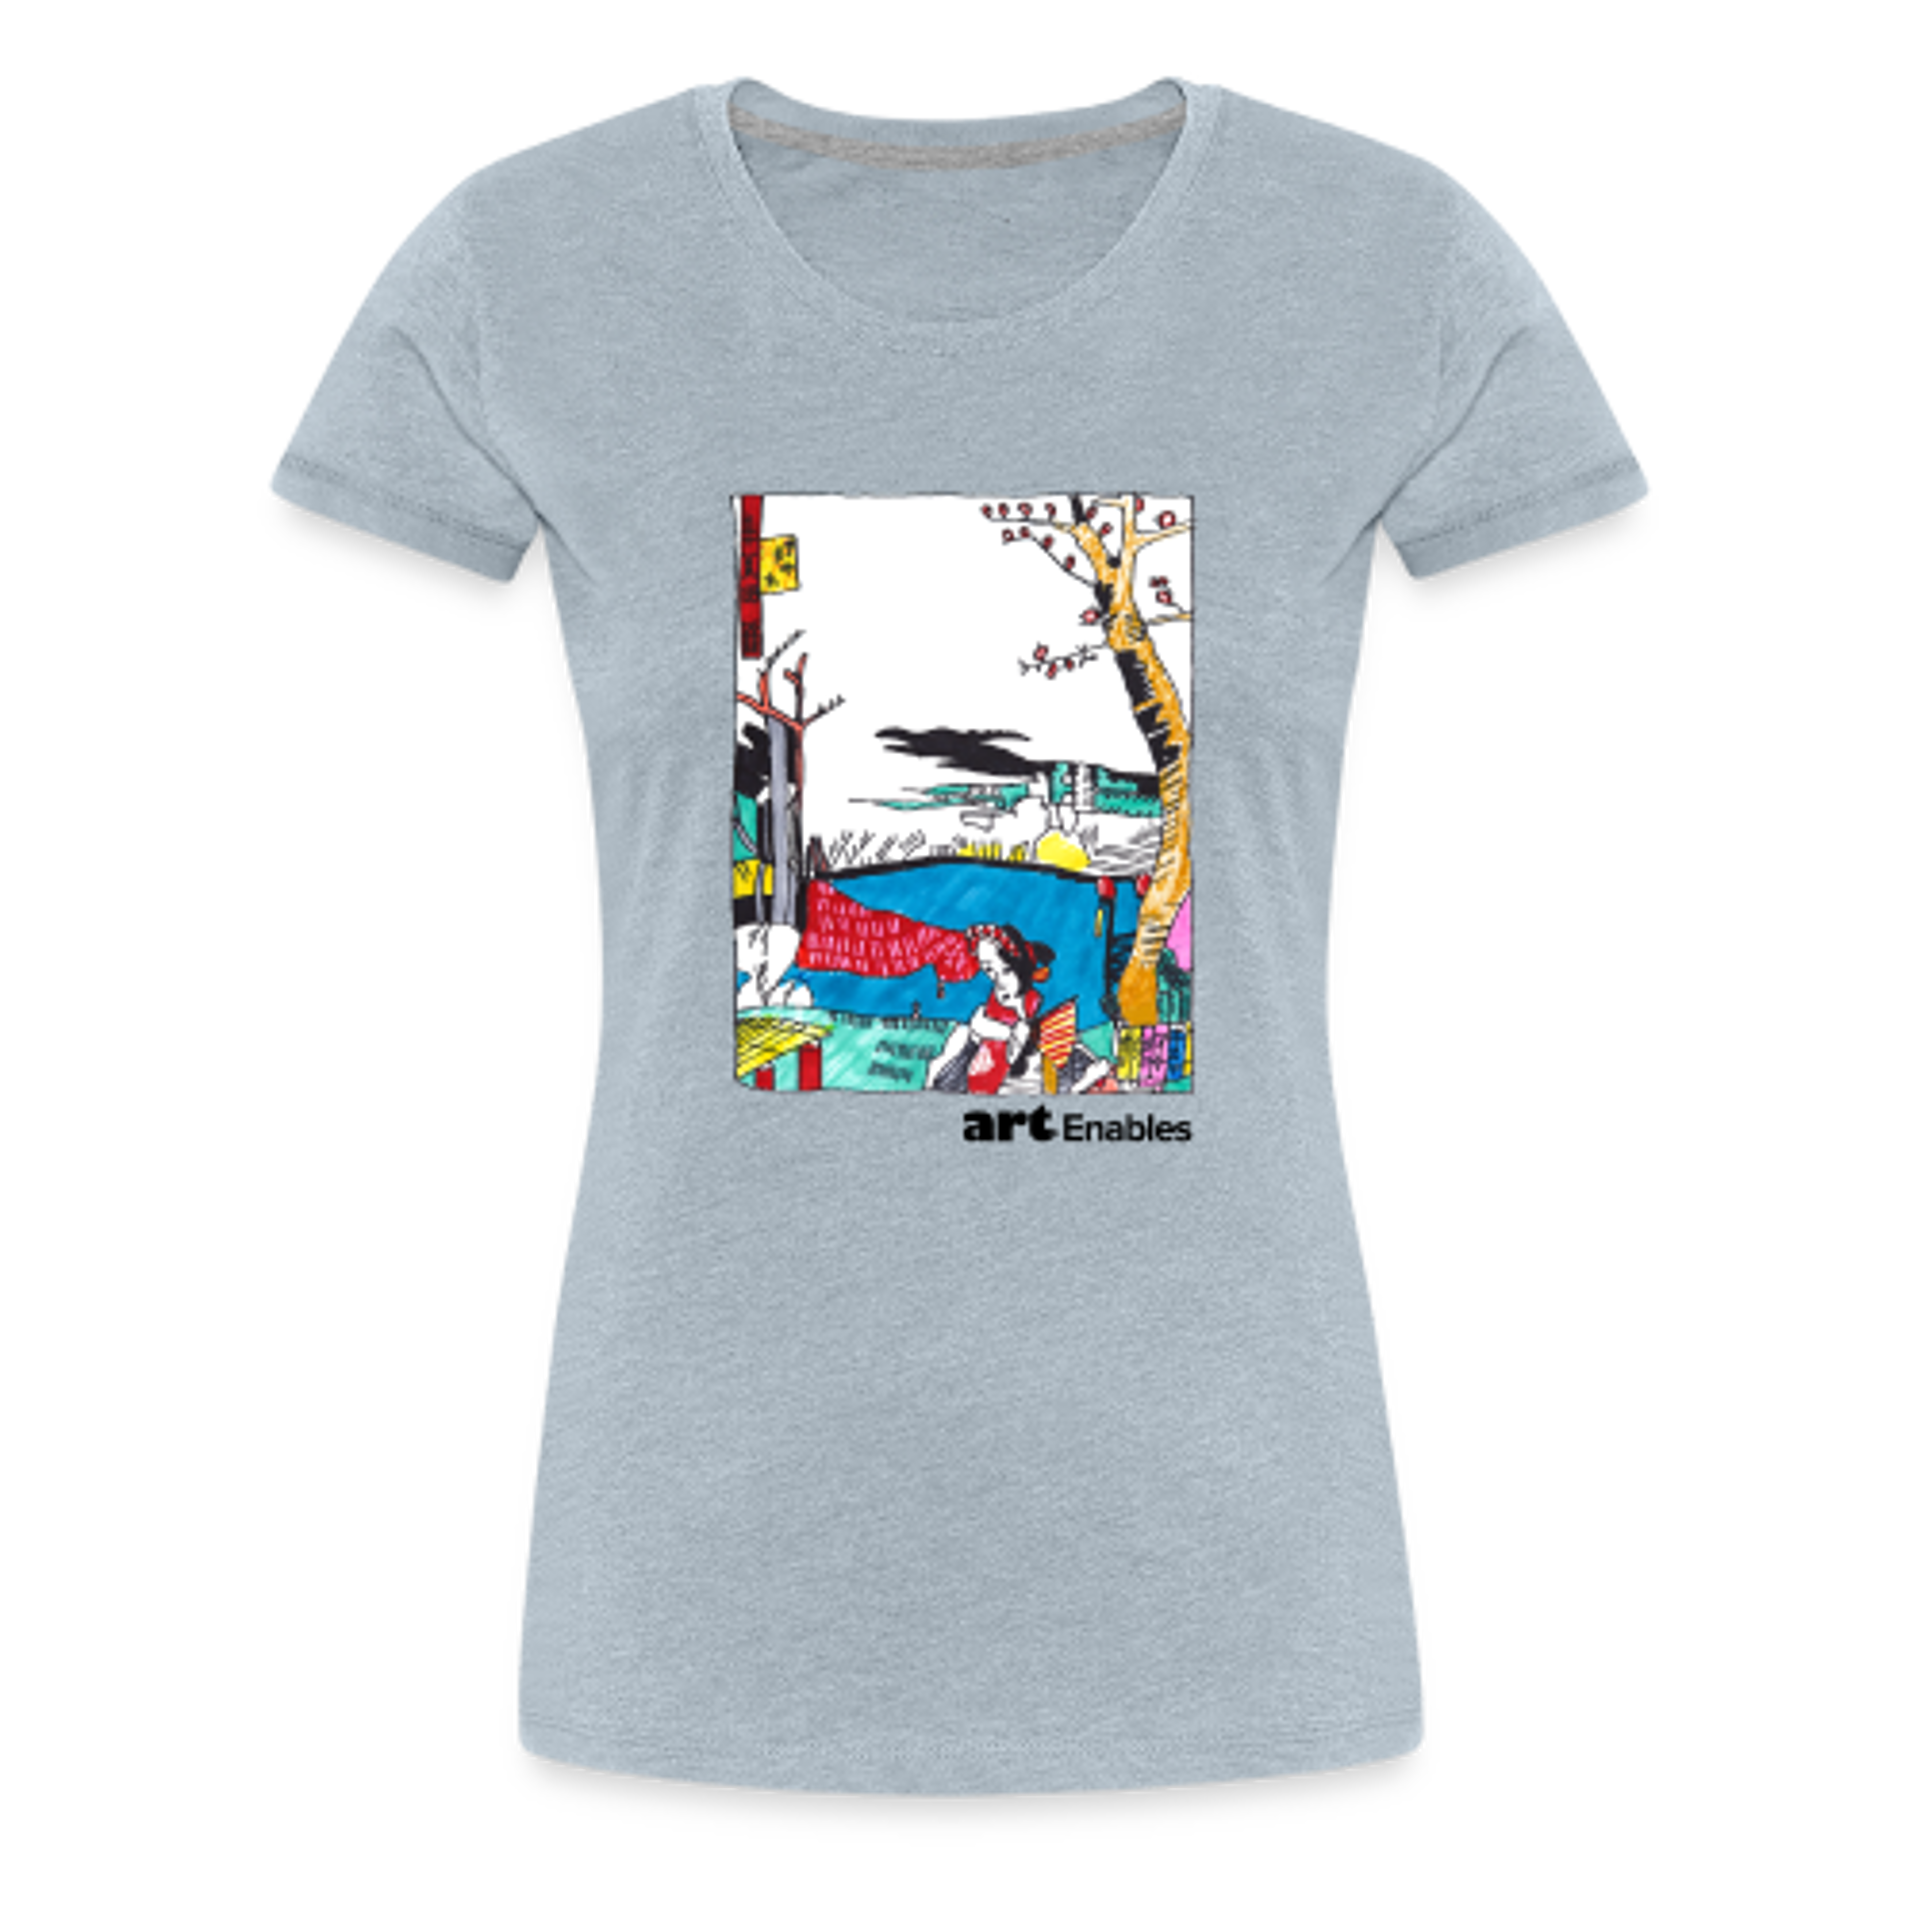 Women's T-shirt (artwork by Charles Meissner) Large - heather ice blue by Art Enables Merchandise